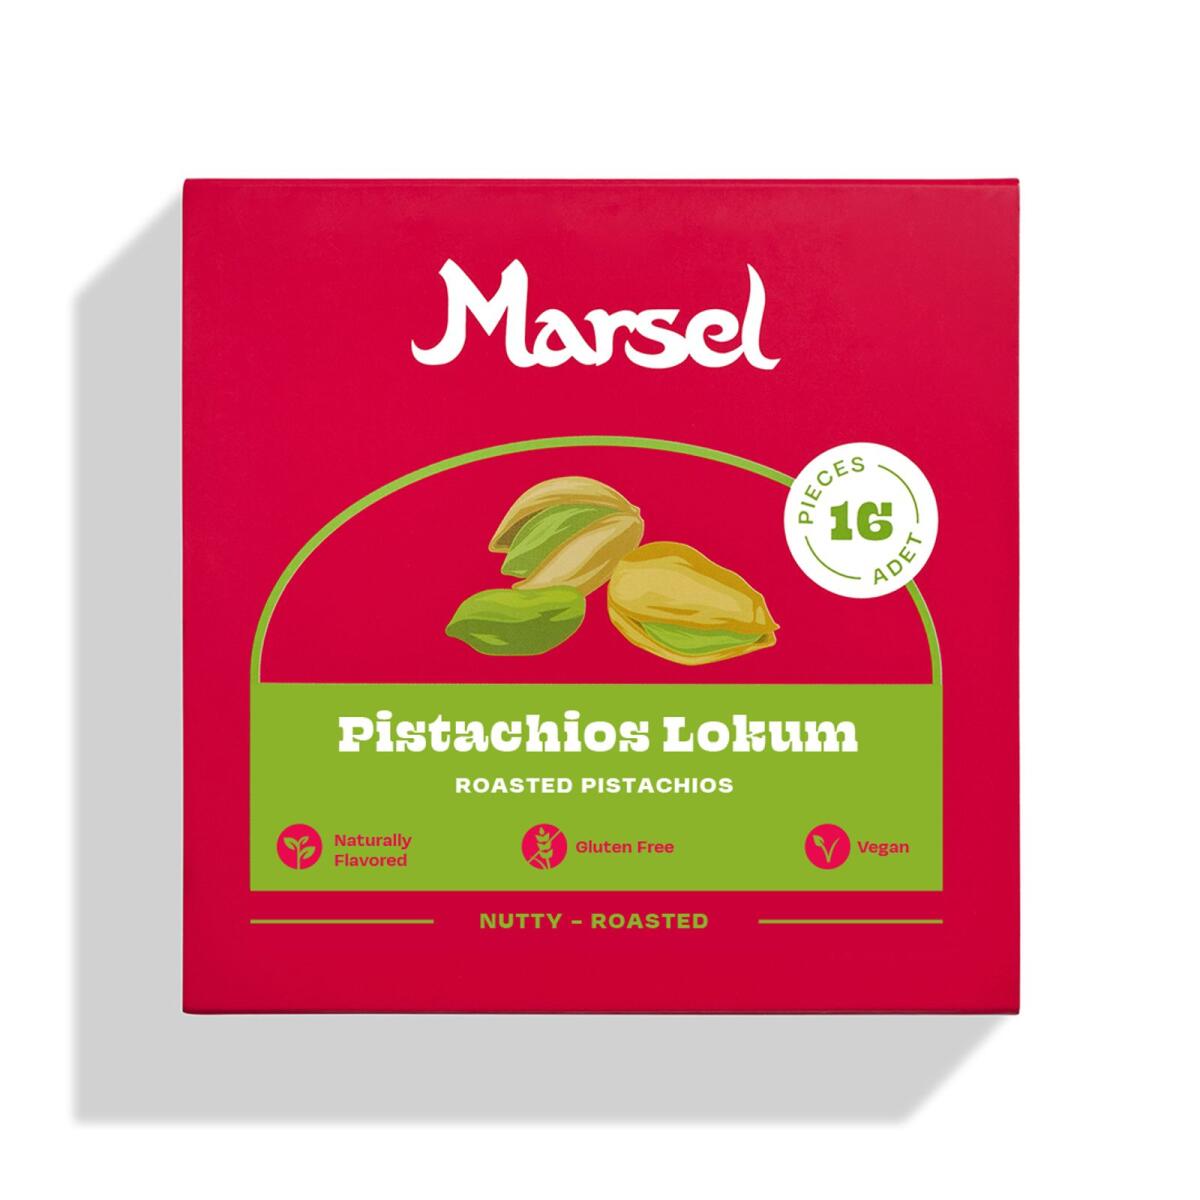 Centring on authentic flavours and natural ingredients, Marsel's Pistachio Turkish Delights represent a harmonious blend of heritage and creativity. Dh25